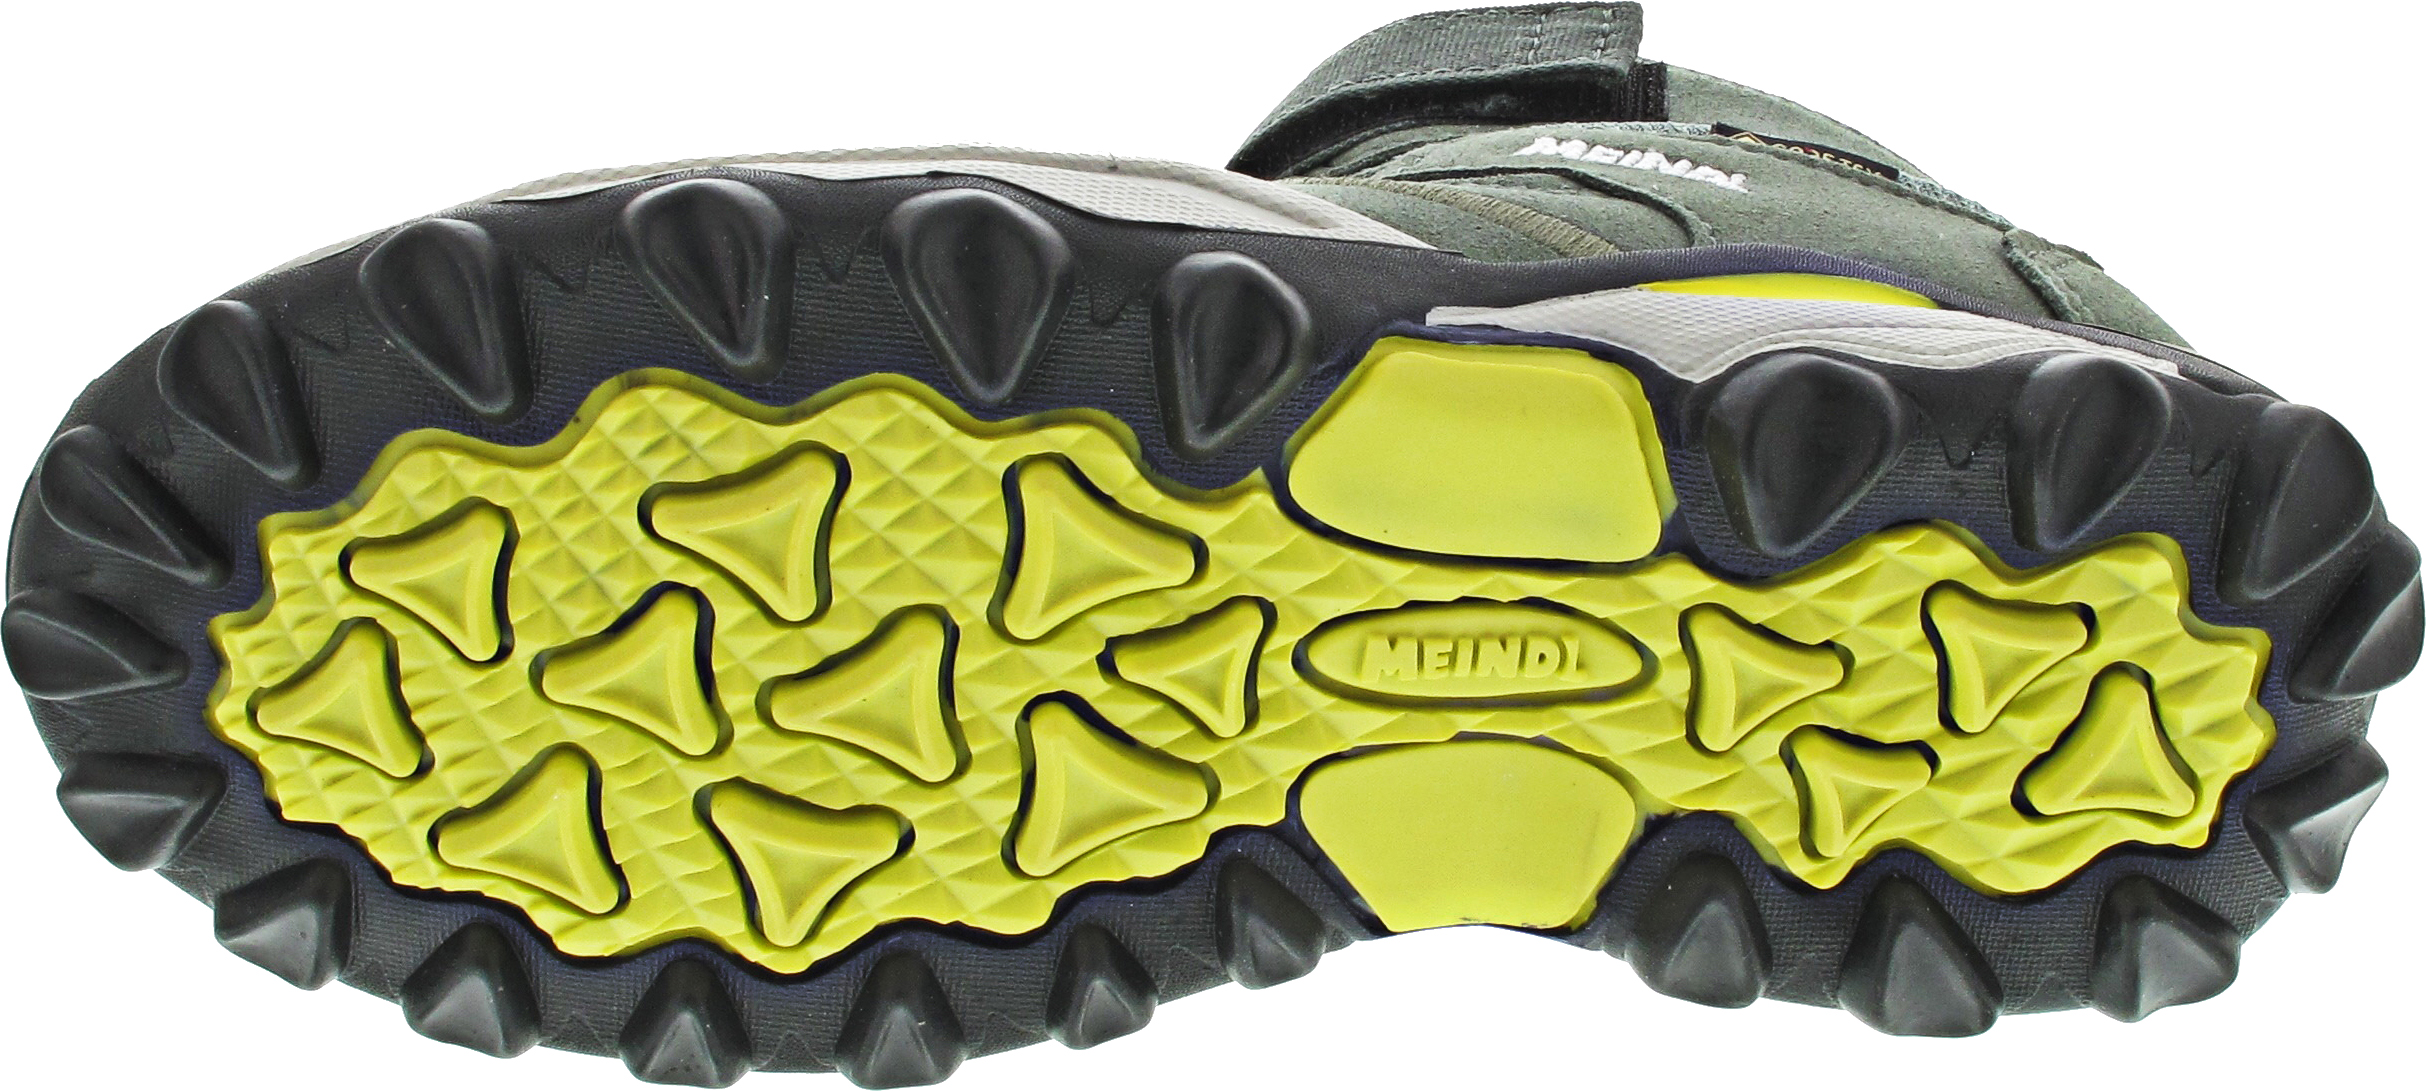 Meindl Lucca J. Mid GTX